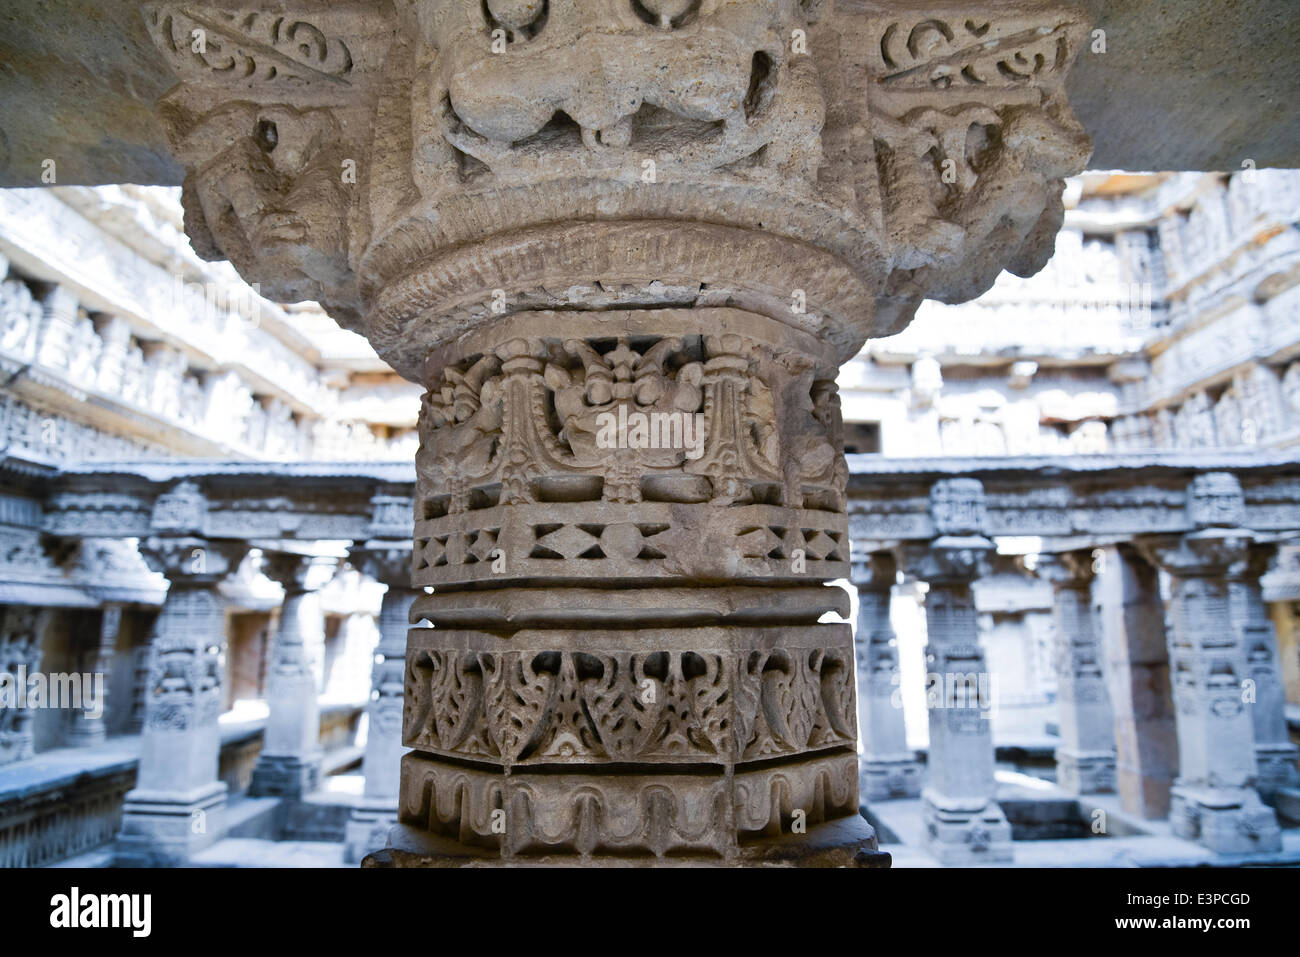 The intricate carvings of the structure of   'Rani-ki-Vav'. Rani Ki Vav is one of the finest stepwells in India. It is  a  stepwell in Gujarat built in the 11th century in memory of King Bhimdev I of the Solanki dynasty. The stepwell was approved by UNESCO as  World Heritage Site for its exceptional example of technological development   in utilizing ground water resources. (Photo by Nisarg Lakhamani/Pacific Press) Stock Photo